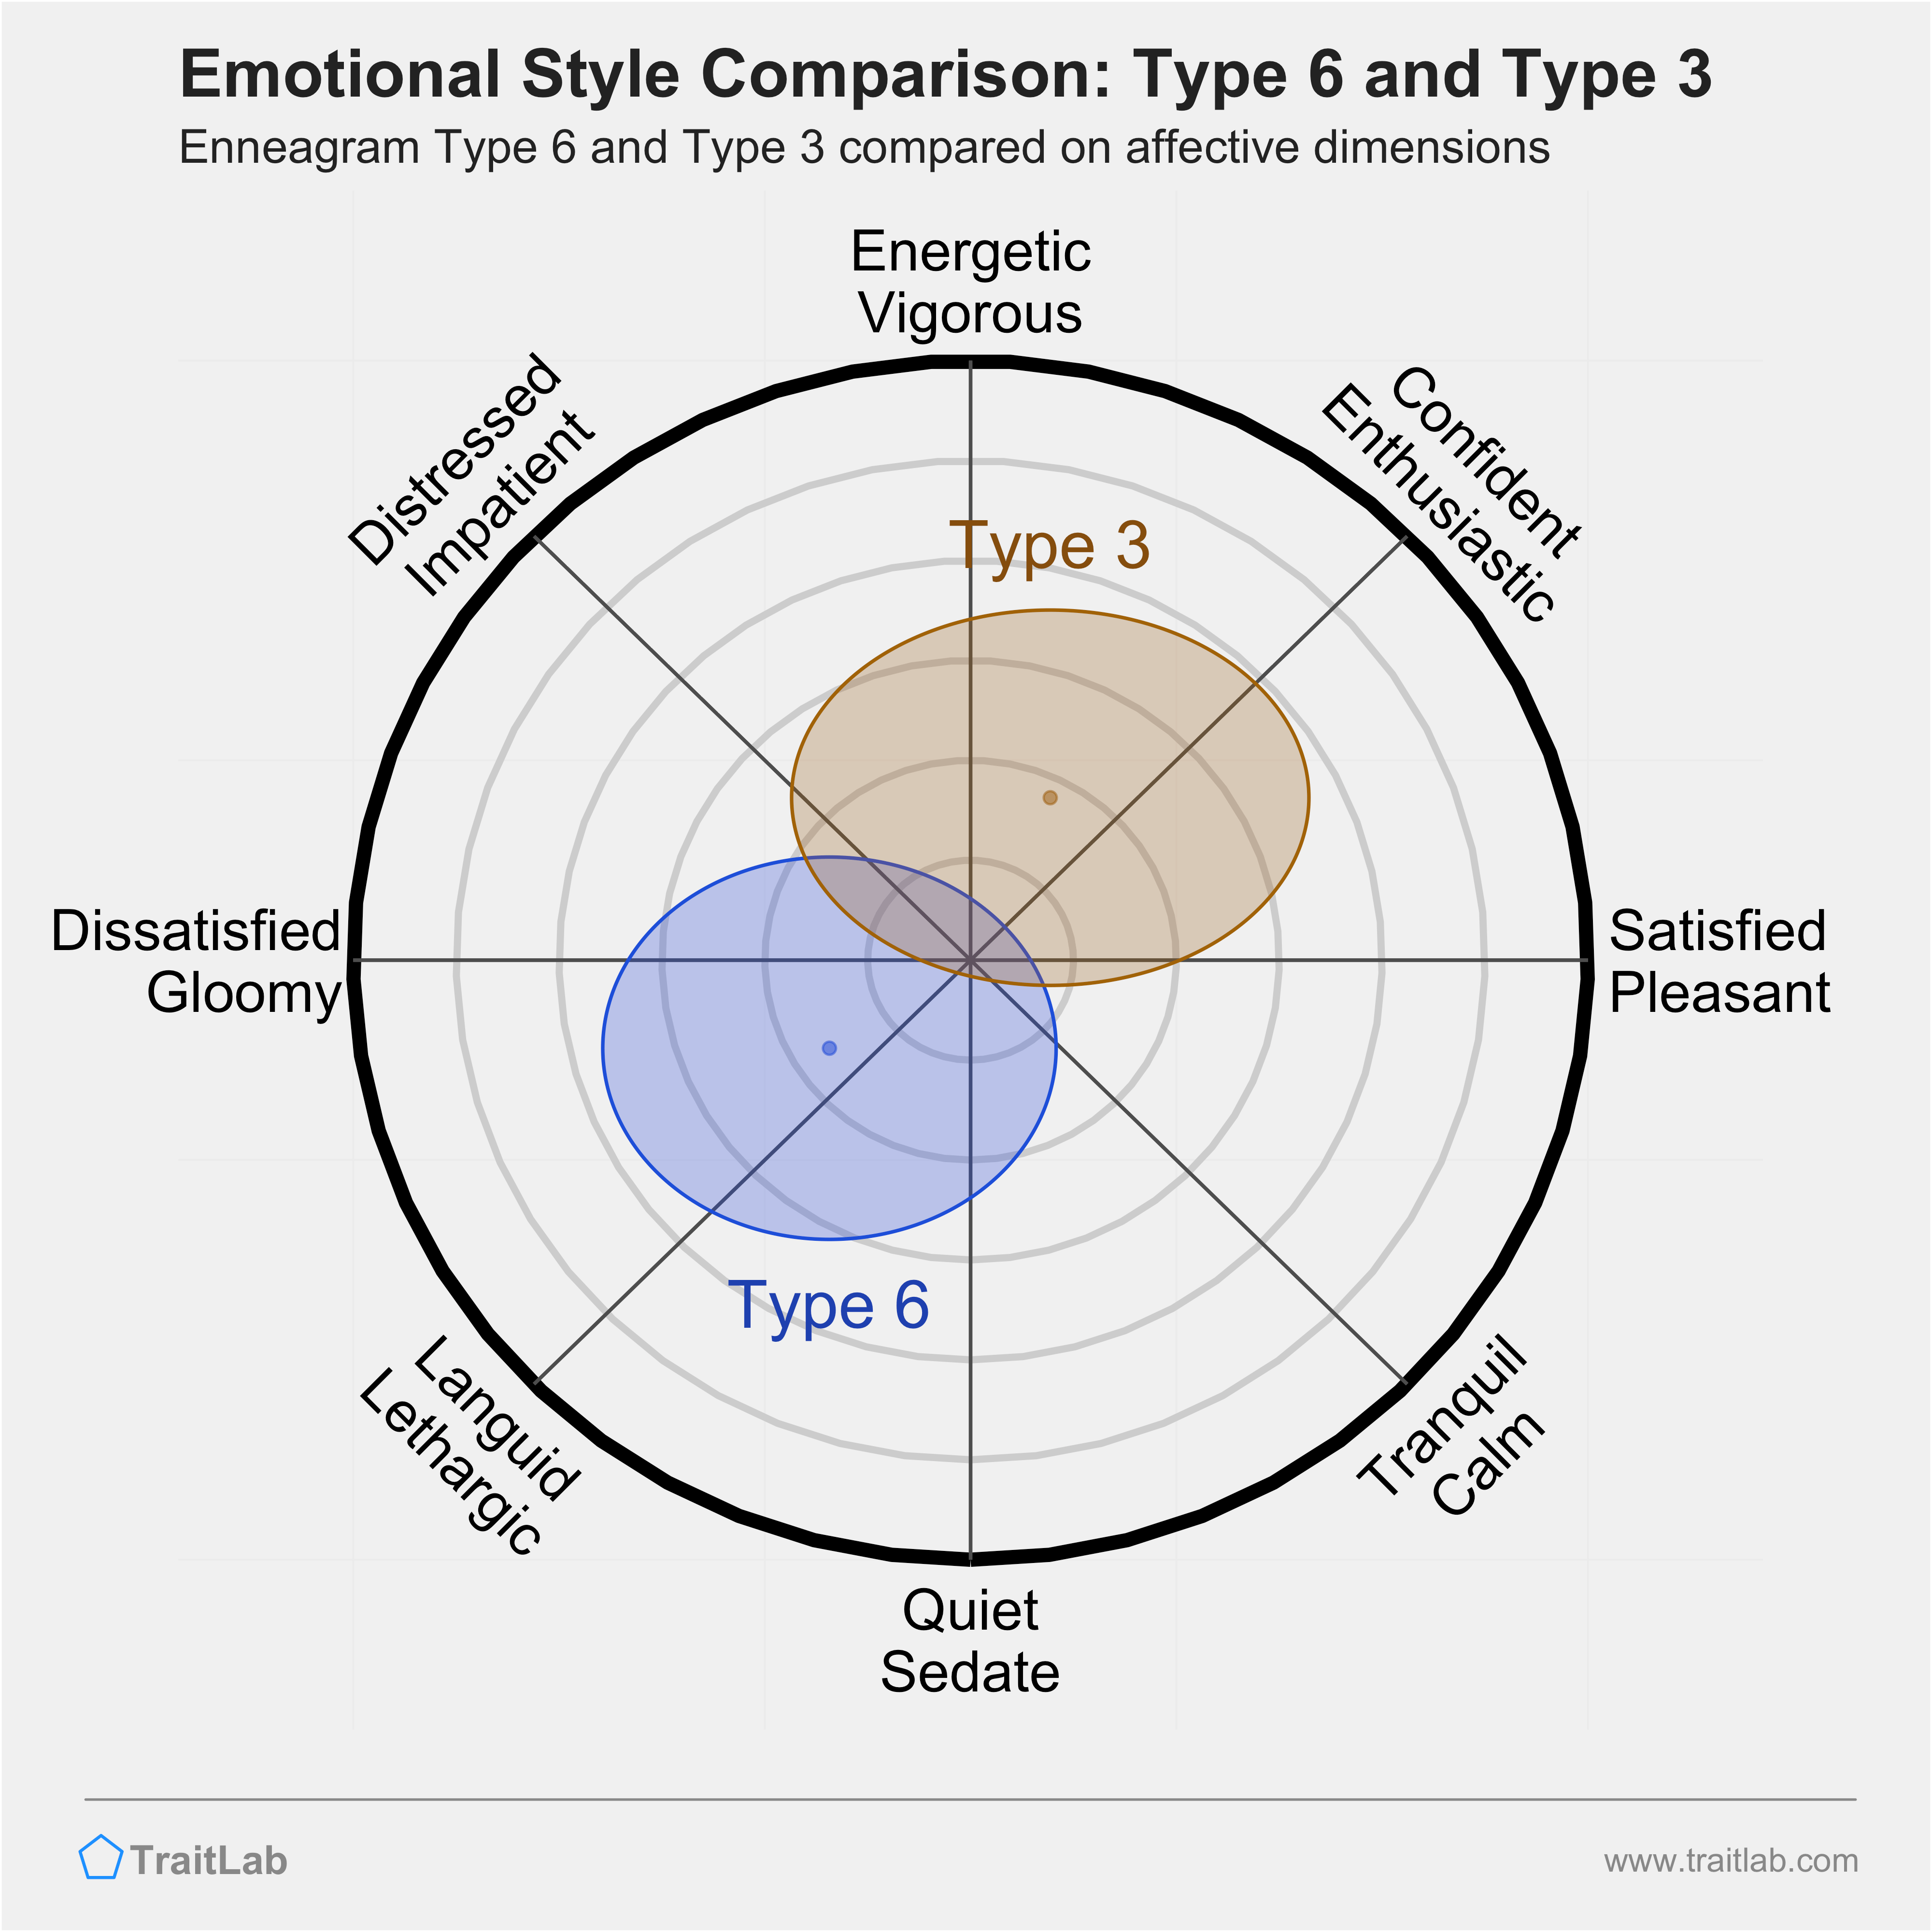 Type 6 and Type 3 comparison across emotional (affective) dimensions